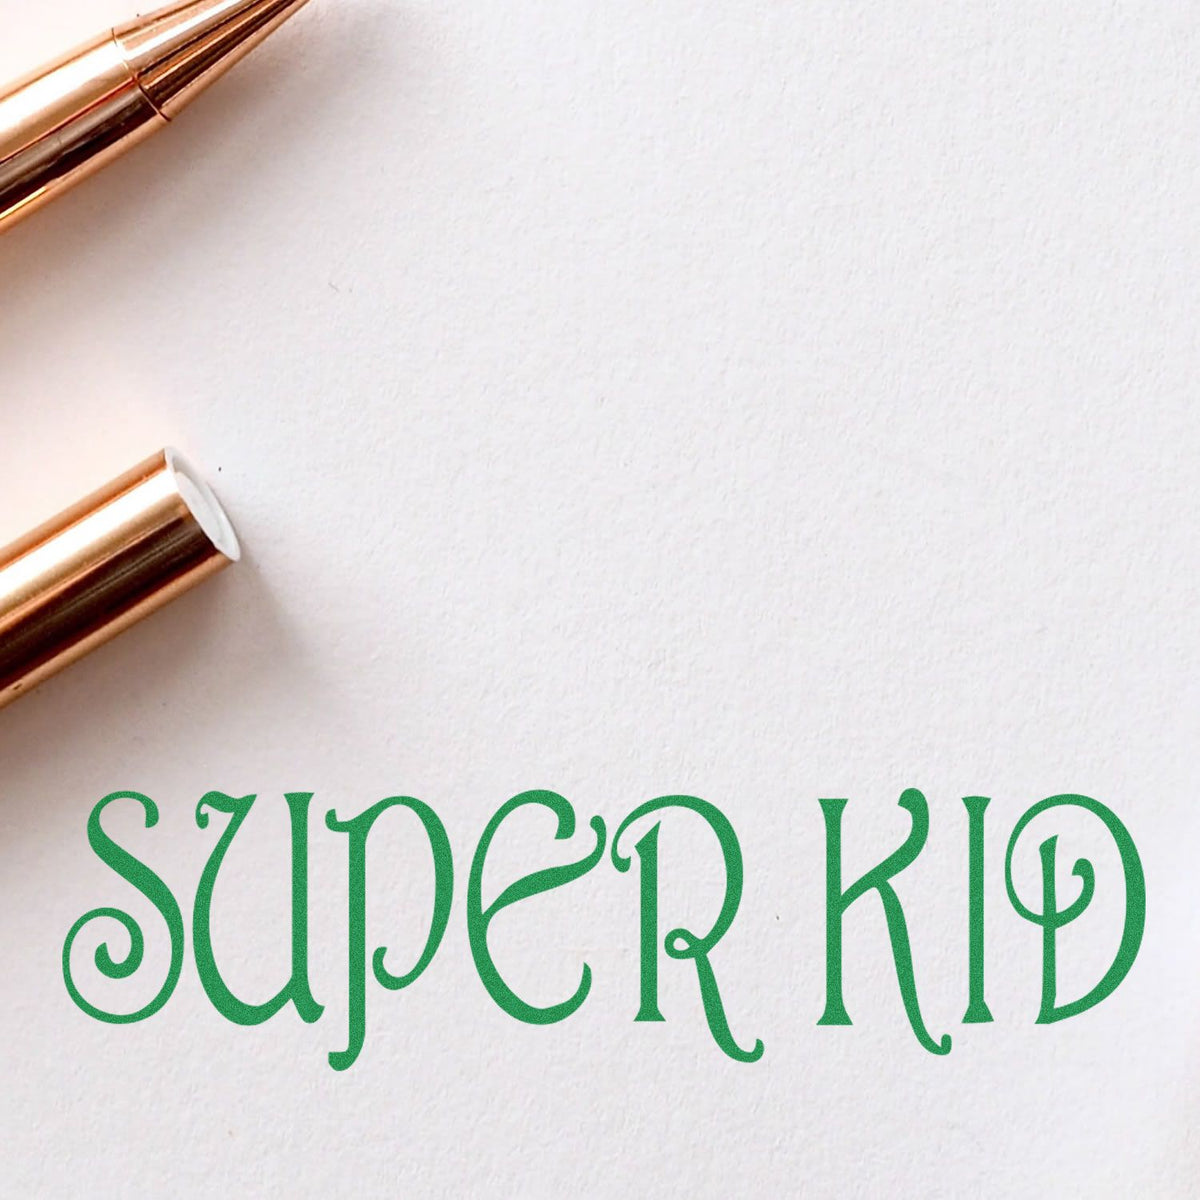 Large Super Kid Rubber Stamp In Use